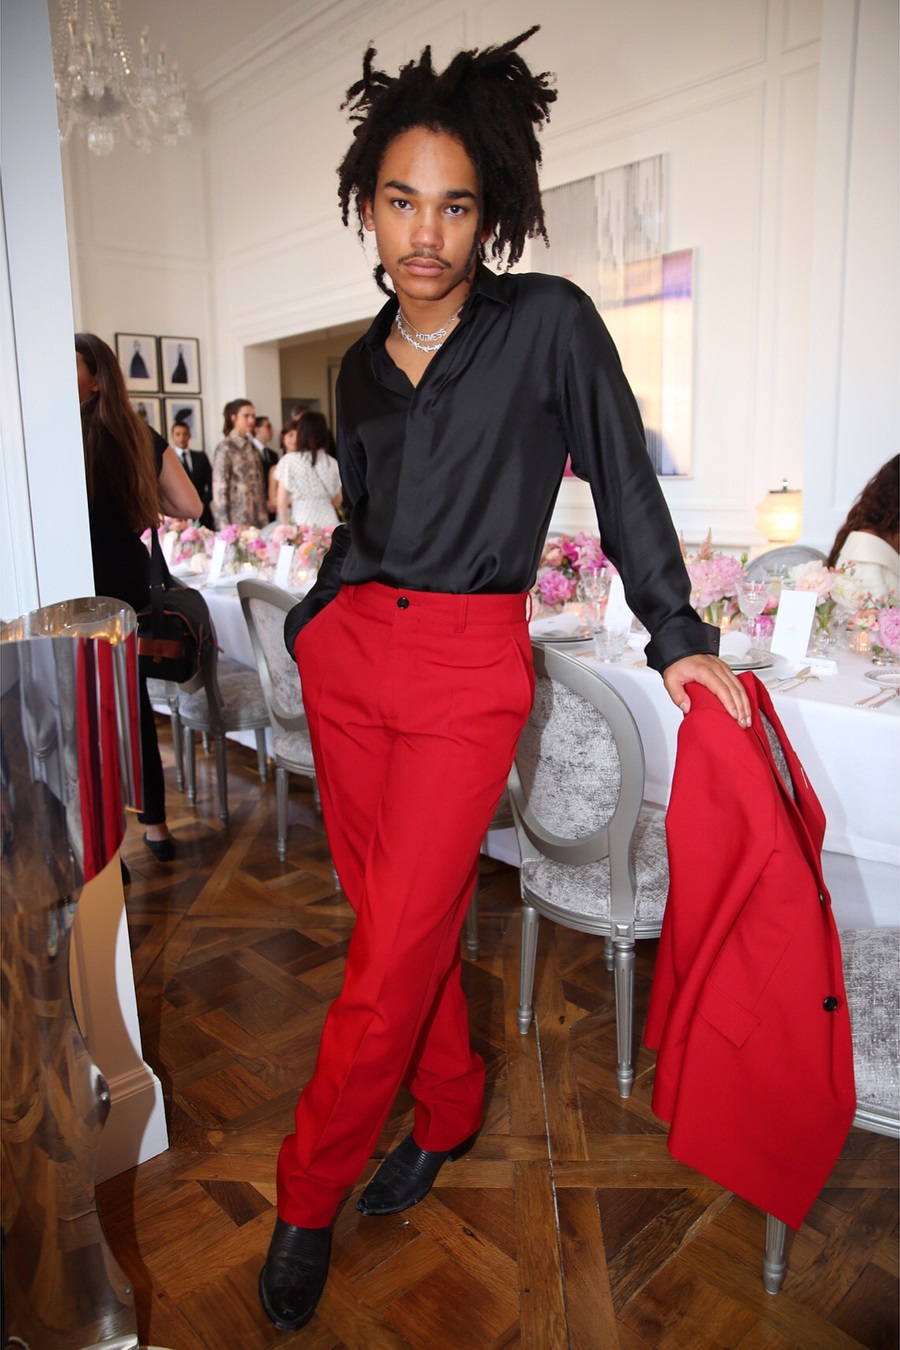 SPOTTED: Luka Sabbat Dresses in Smooth Christian Dior Suit